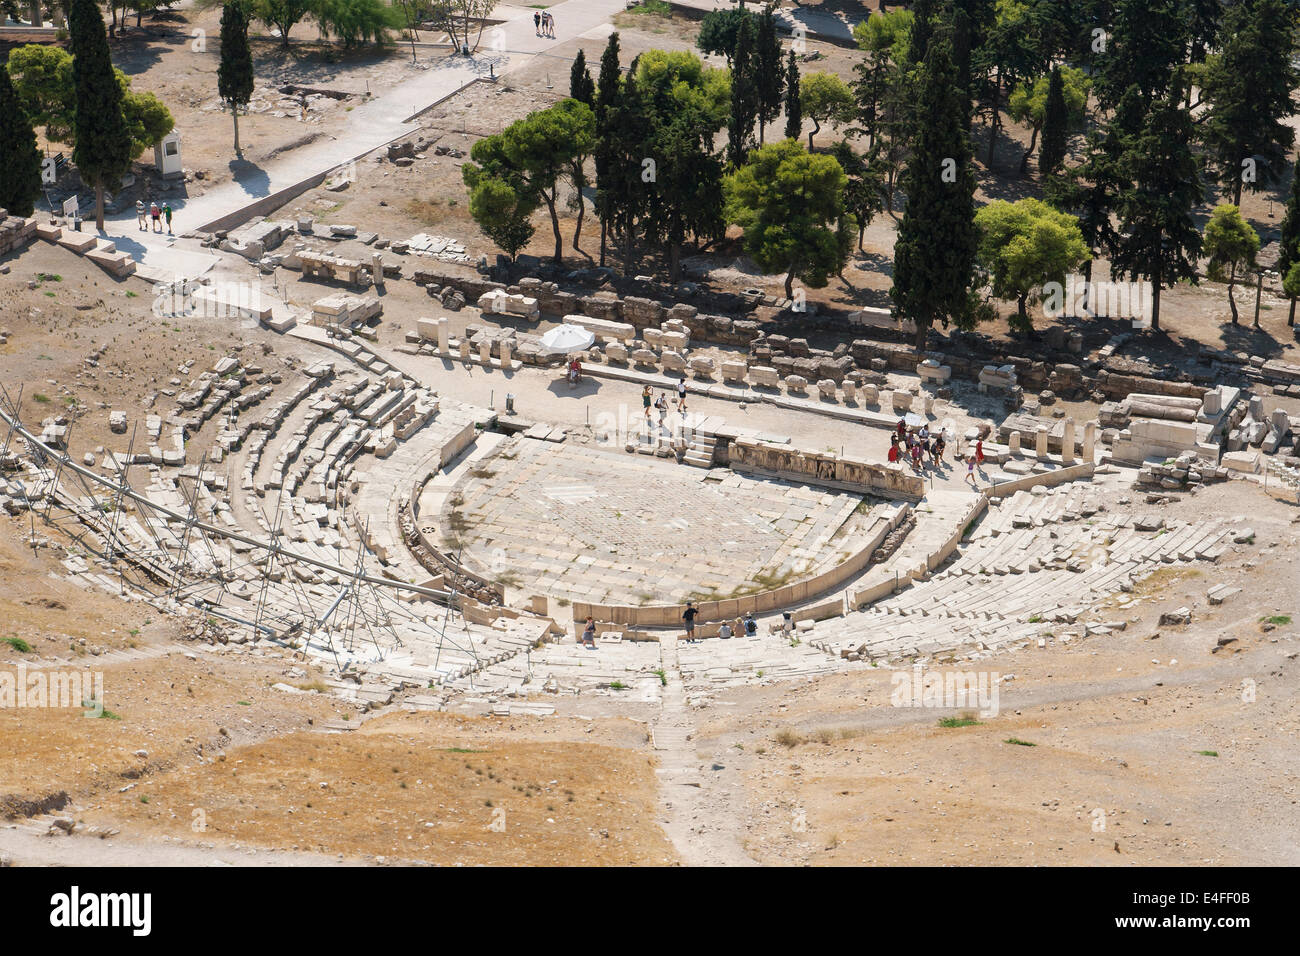 Theatre of Dionysus in the Acropolis, Athens, Greece. Stock Photo